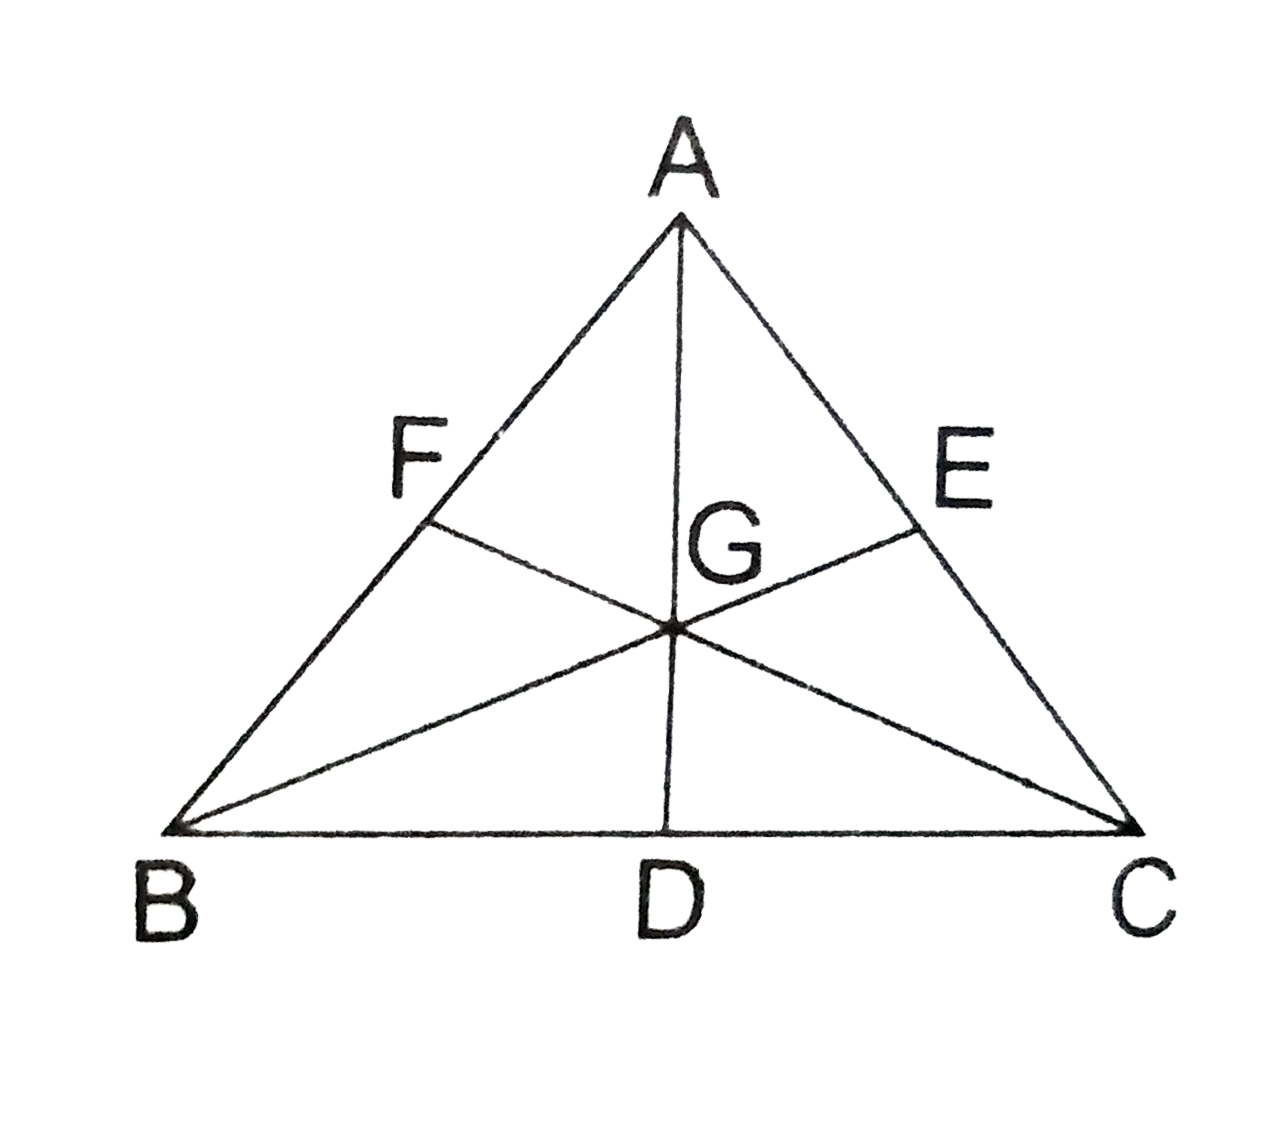 If the medians of a triangle ABC intersect at G, show that   ar(triangleAGB)=ar(triangleAGC)=ar(triangleBGC)   =(1)/(3)ar(triangleABC).